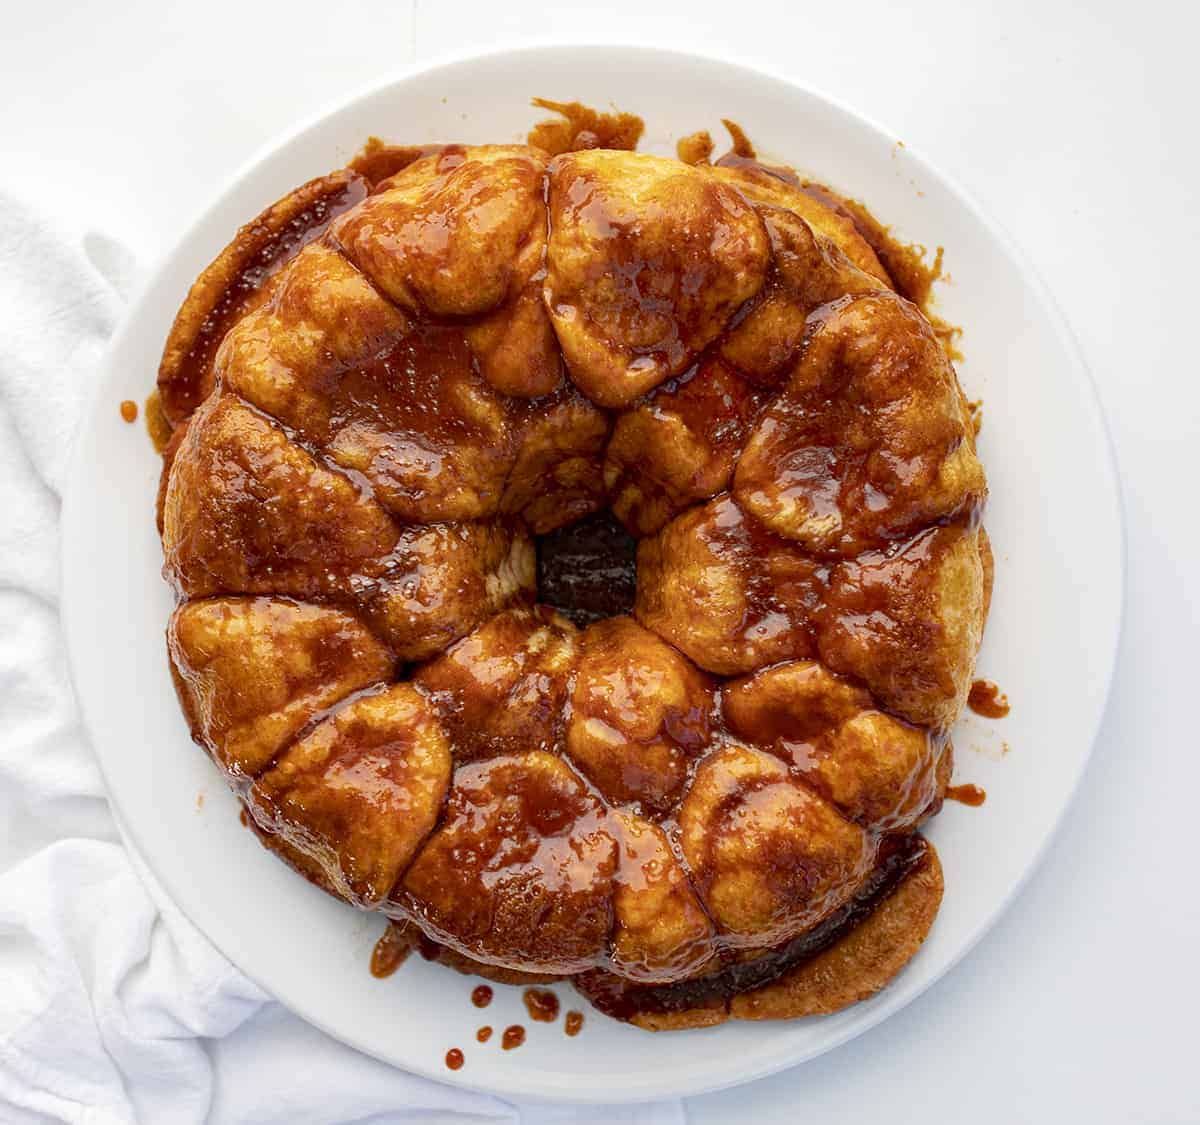 5 Ingredient Monkey Bread from Overhead on a White Plate